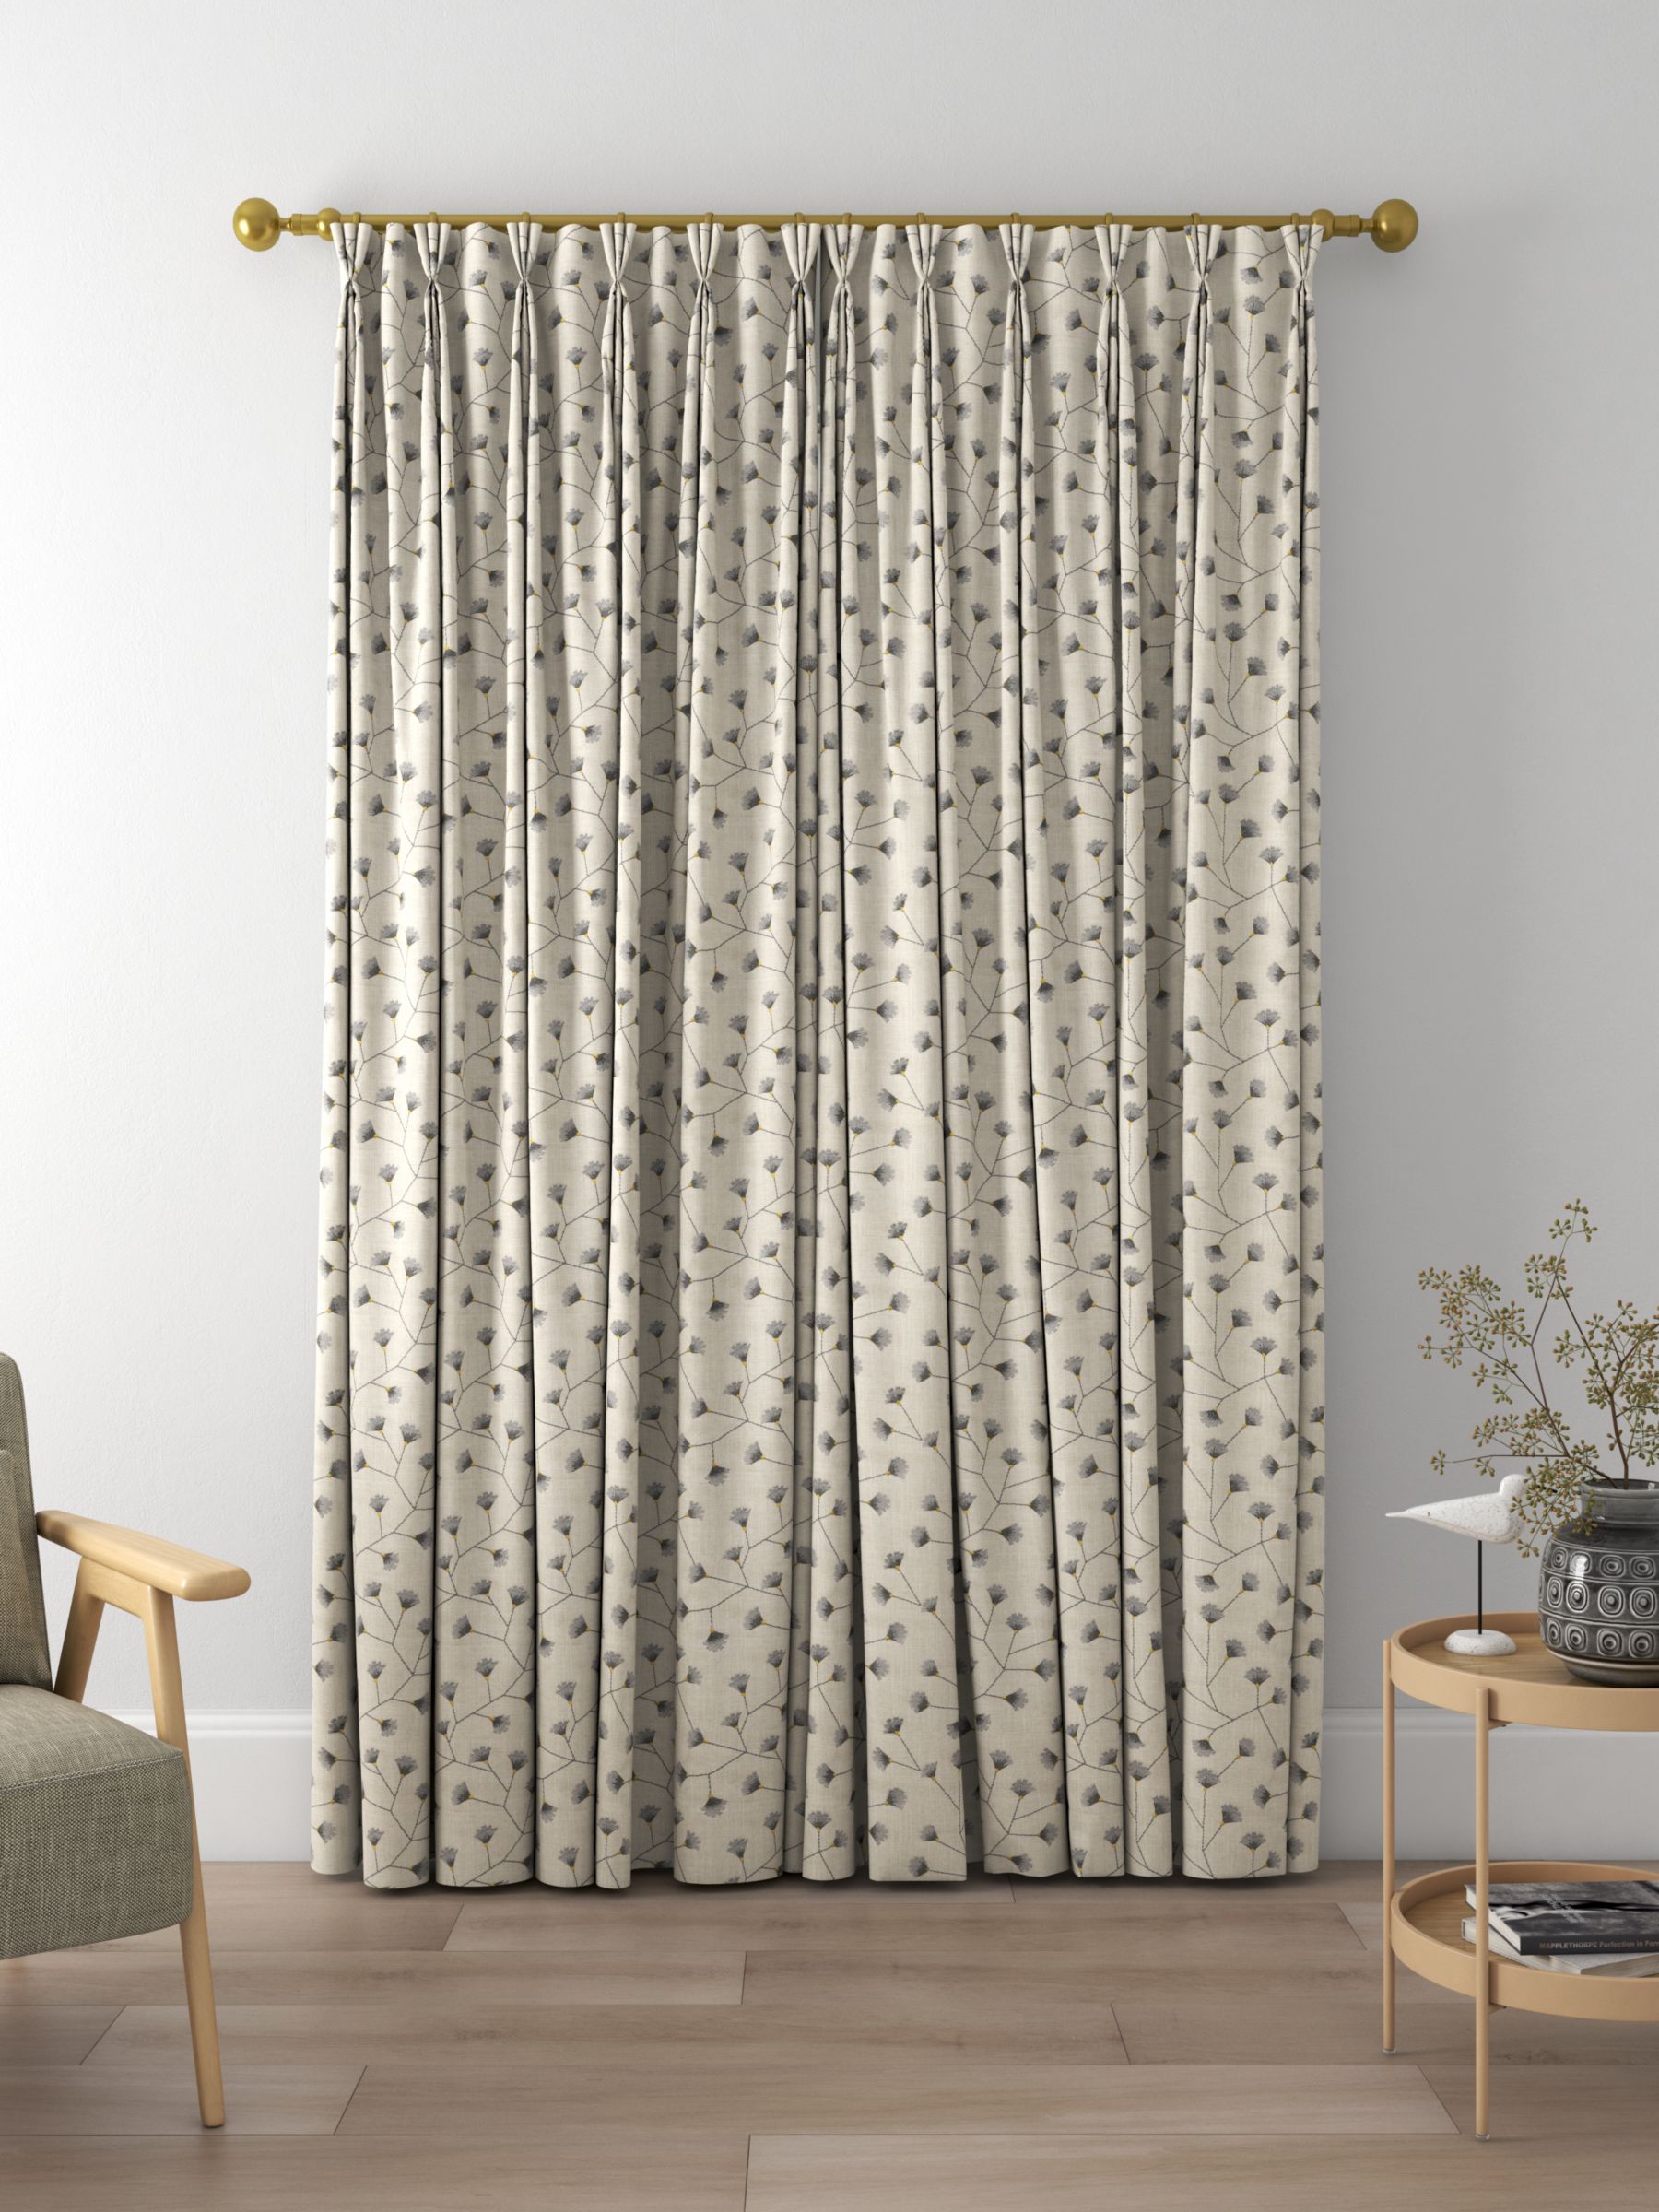 Sanderson Gingko Trail Made to Measure Curtains, Fig/Olive